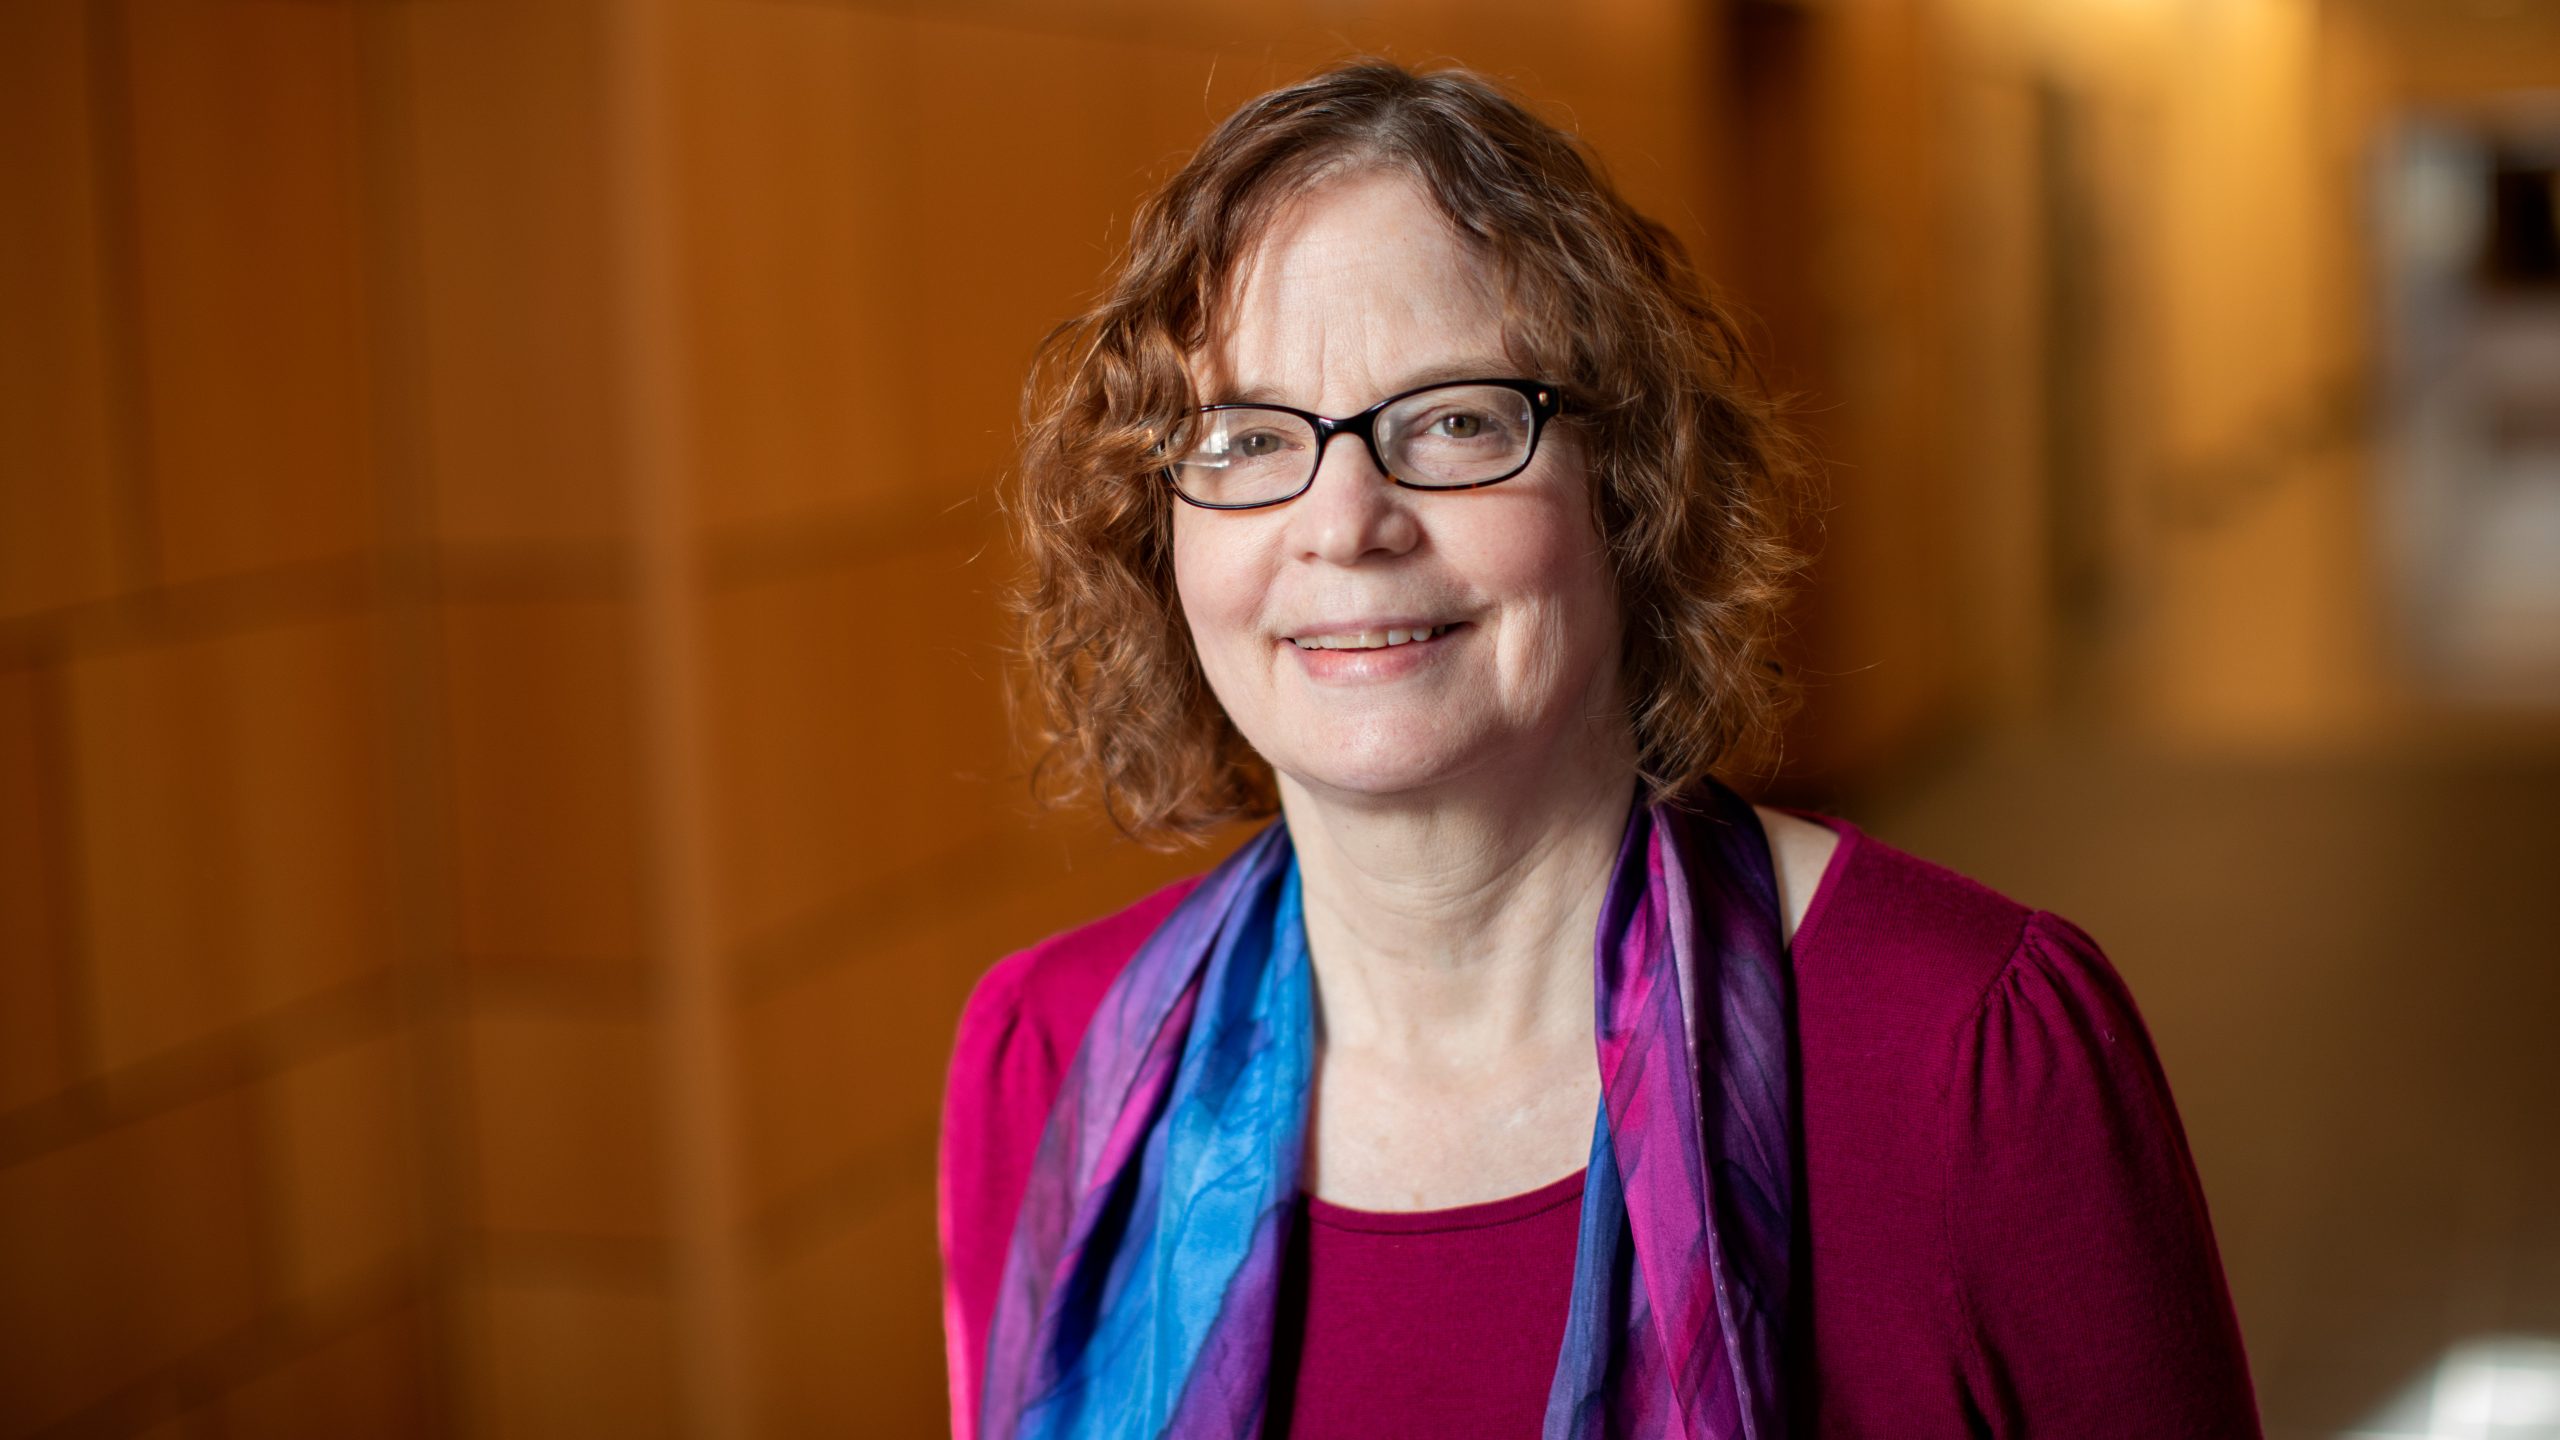 Kate Bronfenbrenner, director of labor education research in the ILR School, has been awarded the 2020 George D. Levy Faculty Award, which recognizes a faculty member whose community collaborations serve as models for outstanding community engagement in higher education.